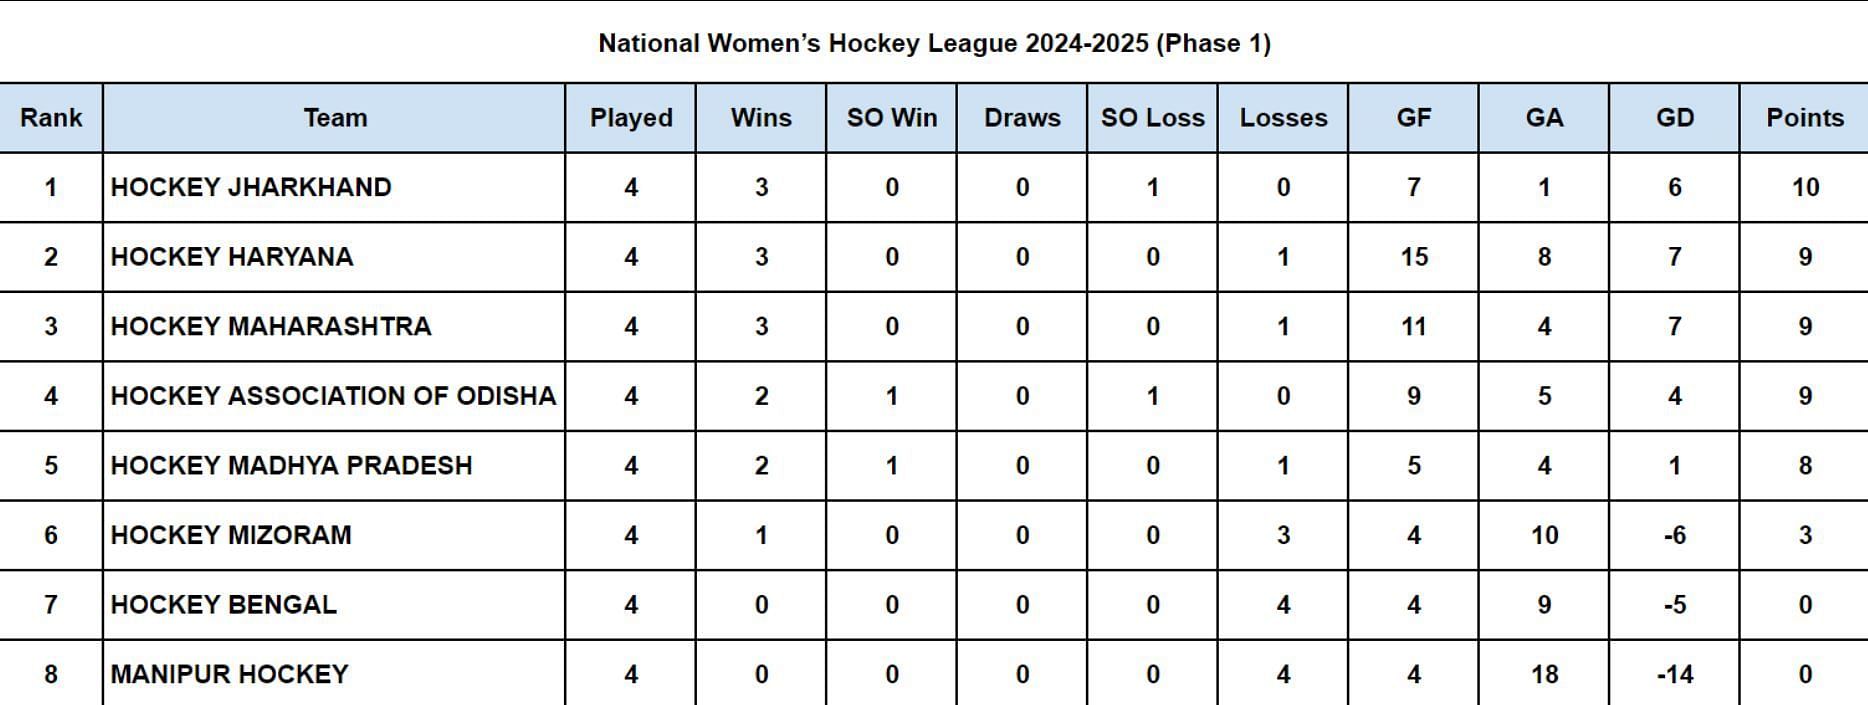 National Women&rsquo;s Hockey League 2024-2025 Points Table